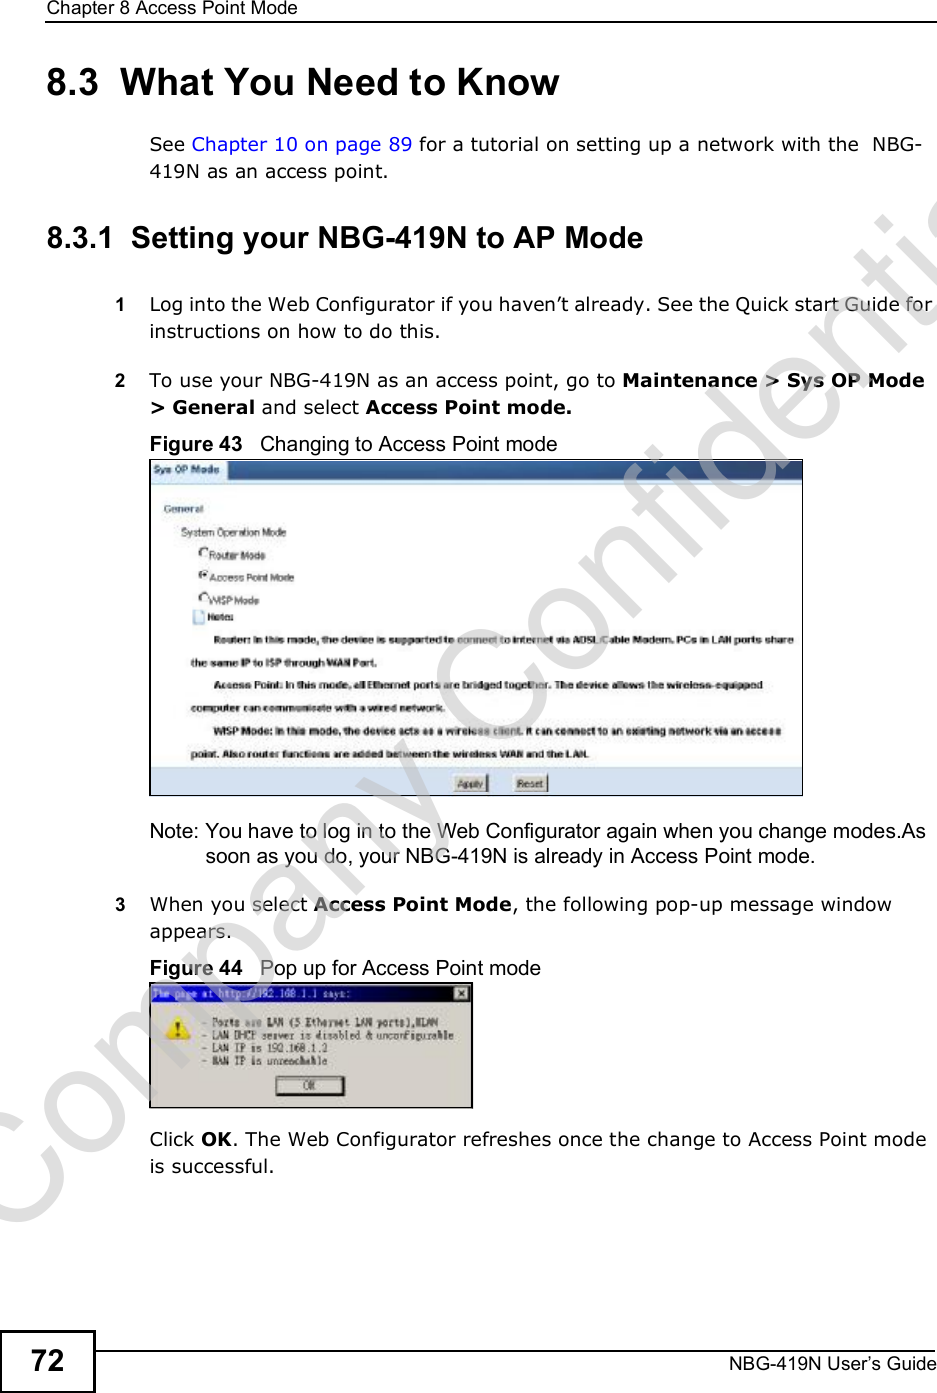 Chapter 8Access Point ModeNBG-419N User s Guide728.3  What You Need to KnowSee Chapter 10 on page 89 for a tutorial on setting up a network with the  NBG-419N as an access point.8.3.1  Setting your NBG-419N to AP Mode1Log into the Web Configurator if you haven!t already. See the Quick start Guide for instructions on how to do this.2To use your NBG-419N as an access point, go to Maintenance &gt; Sys OP Mode &gt; General and select Access Point mode.Figure 43   Changing to Access Point modeNote: You have to log in to the Web Configurator again when you change modes.As soon as you do, your NBG-419N is already in Access Point mode.3When you select Access Point Mode, the following pop-up message window appears.Figure 44   Pop up for Access Point mode Click OK. The Web Configurator refreshes once the change to Access Point mode is successful.Company Confidential